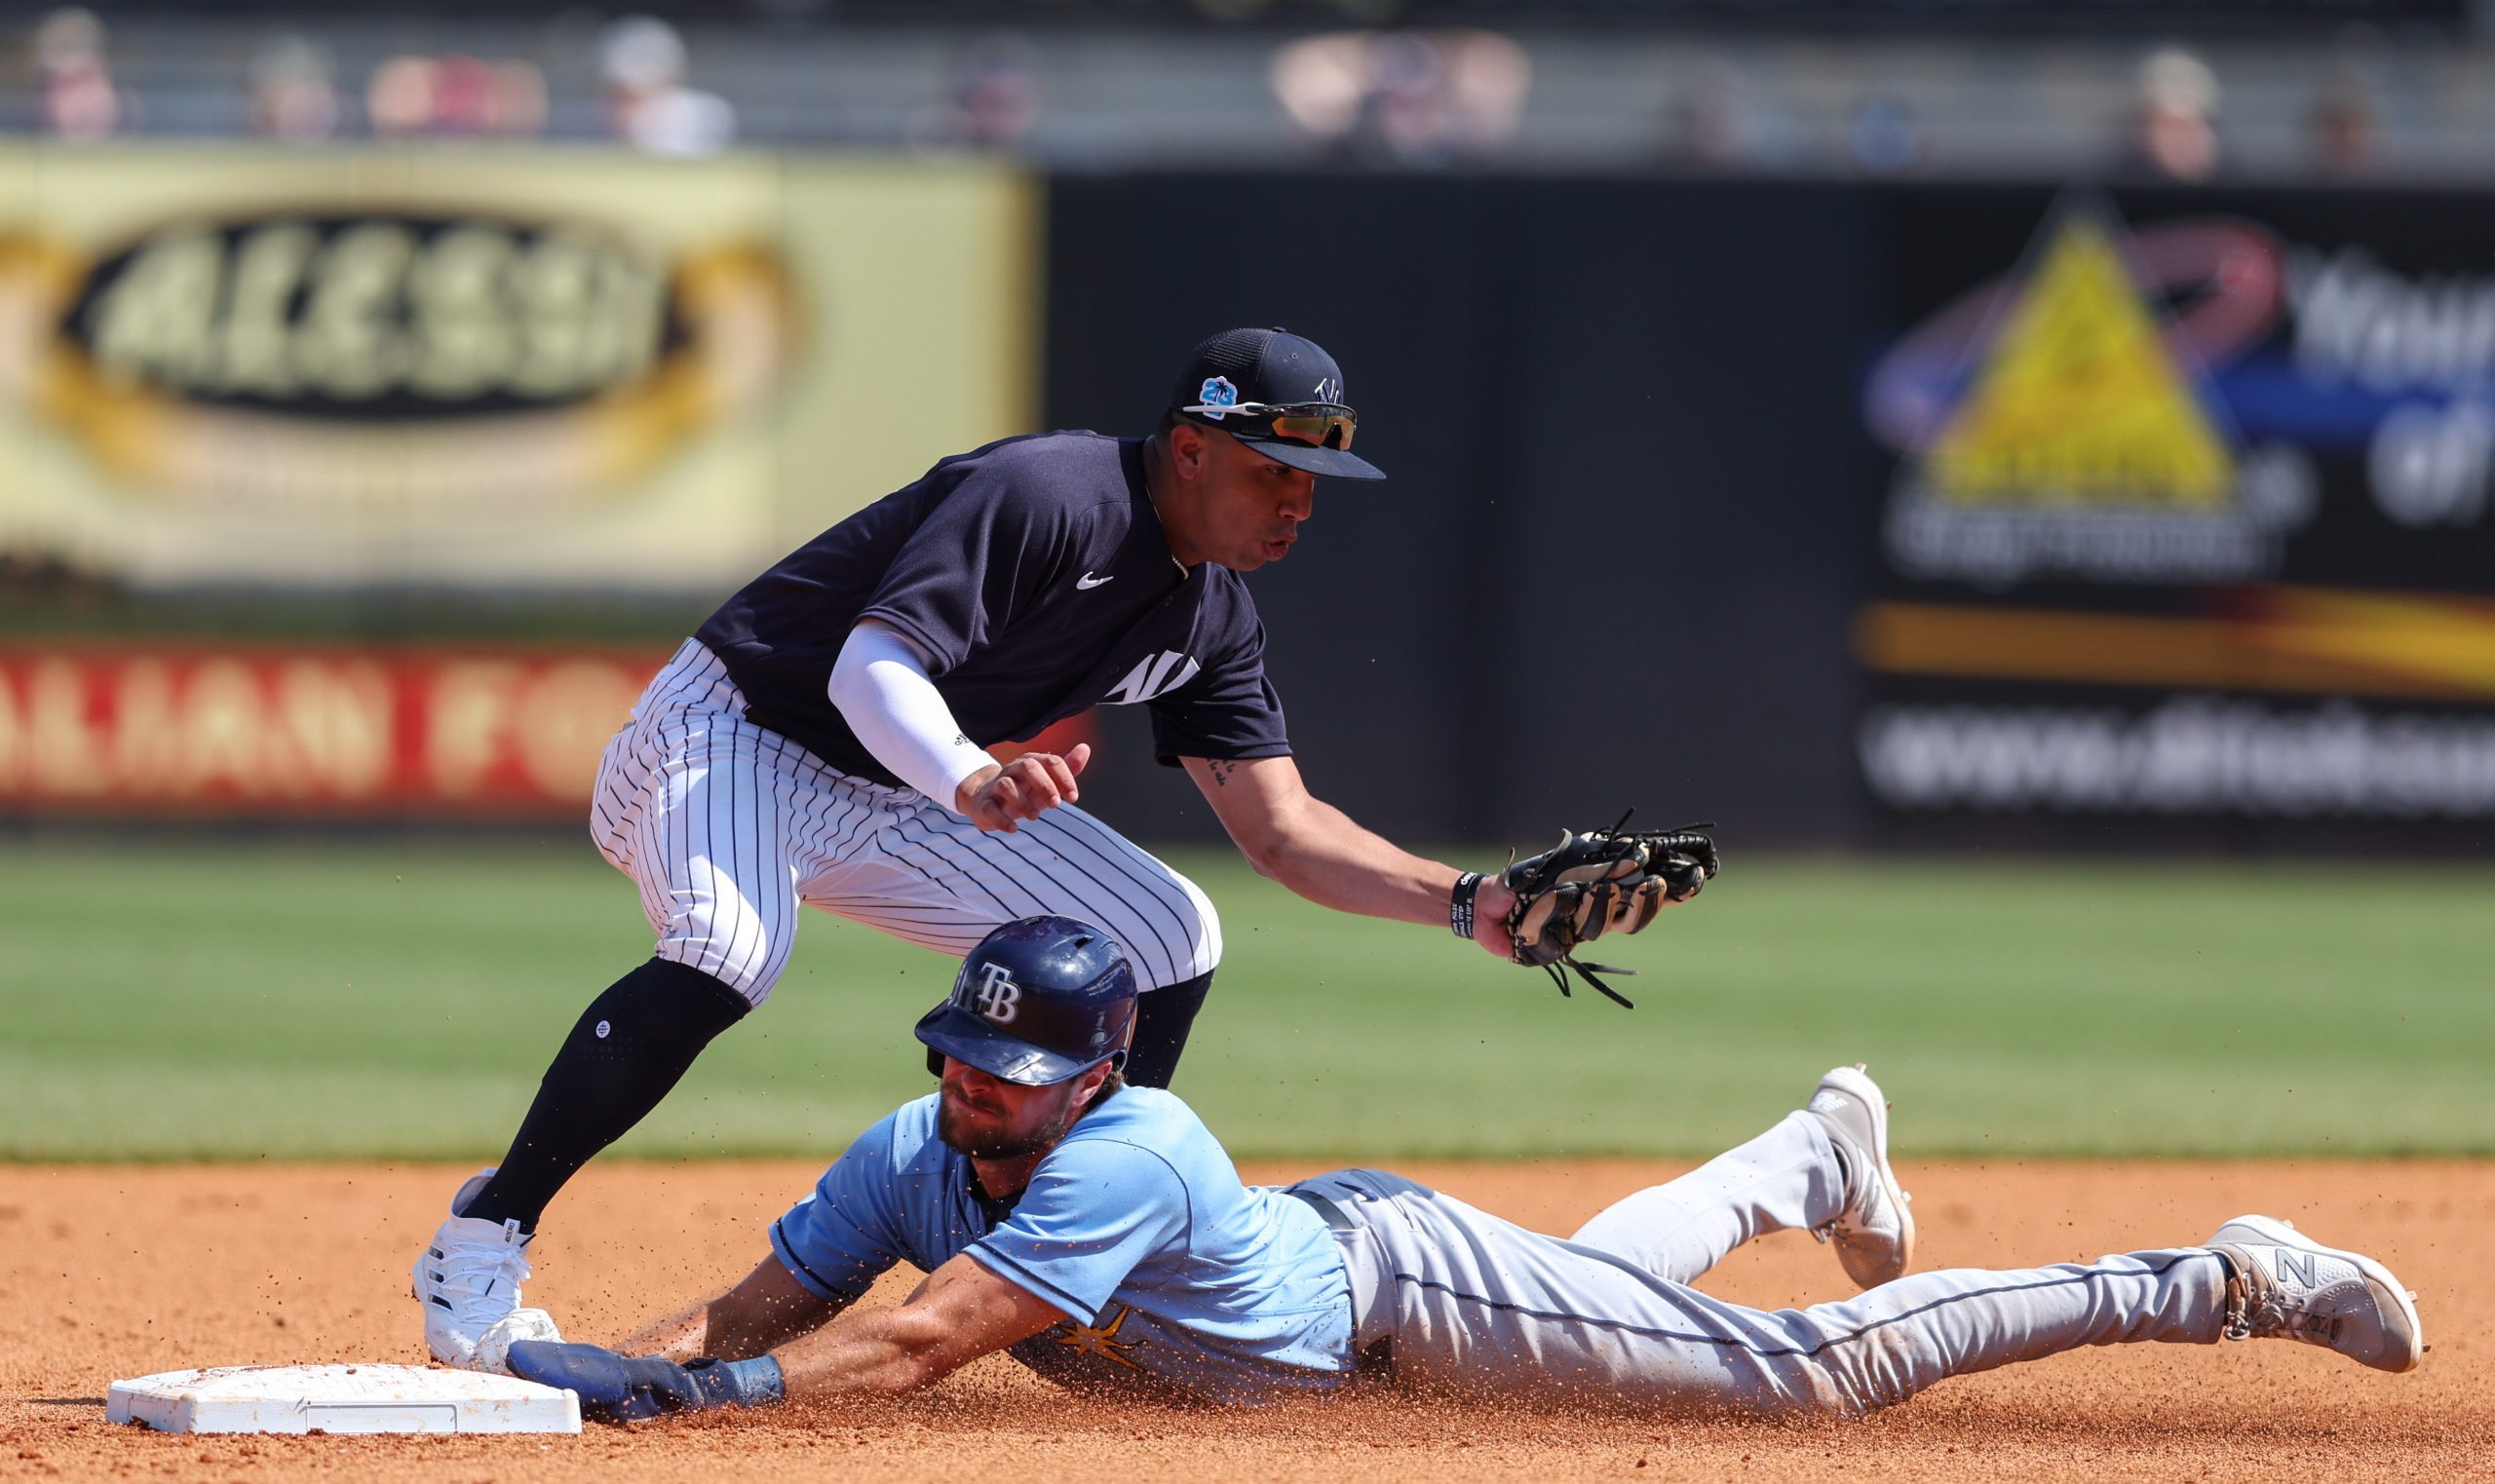 Through the early portion of spring training, the bigger bases have led to a significant increase of stolen bases.